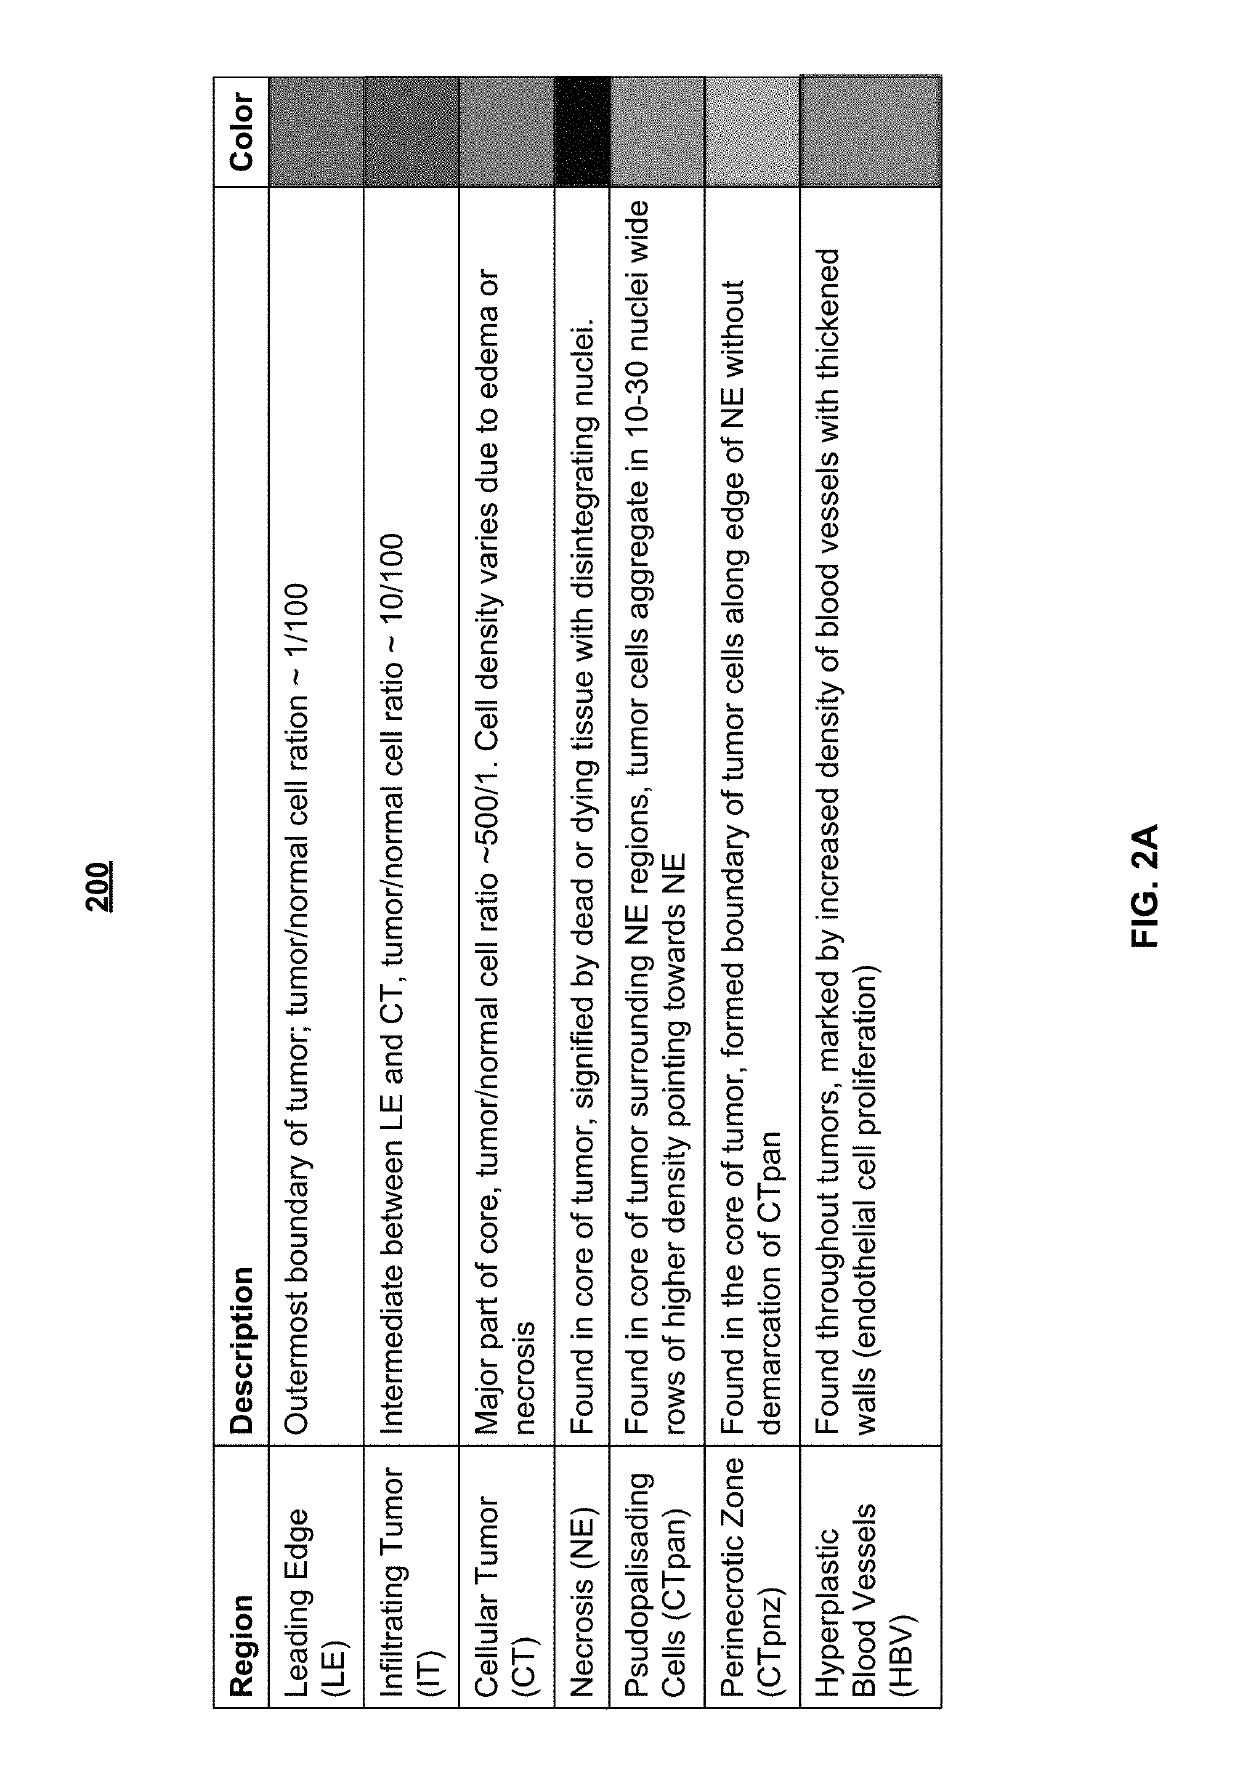 System and method for automatic assessment of cancer